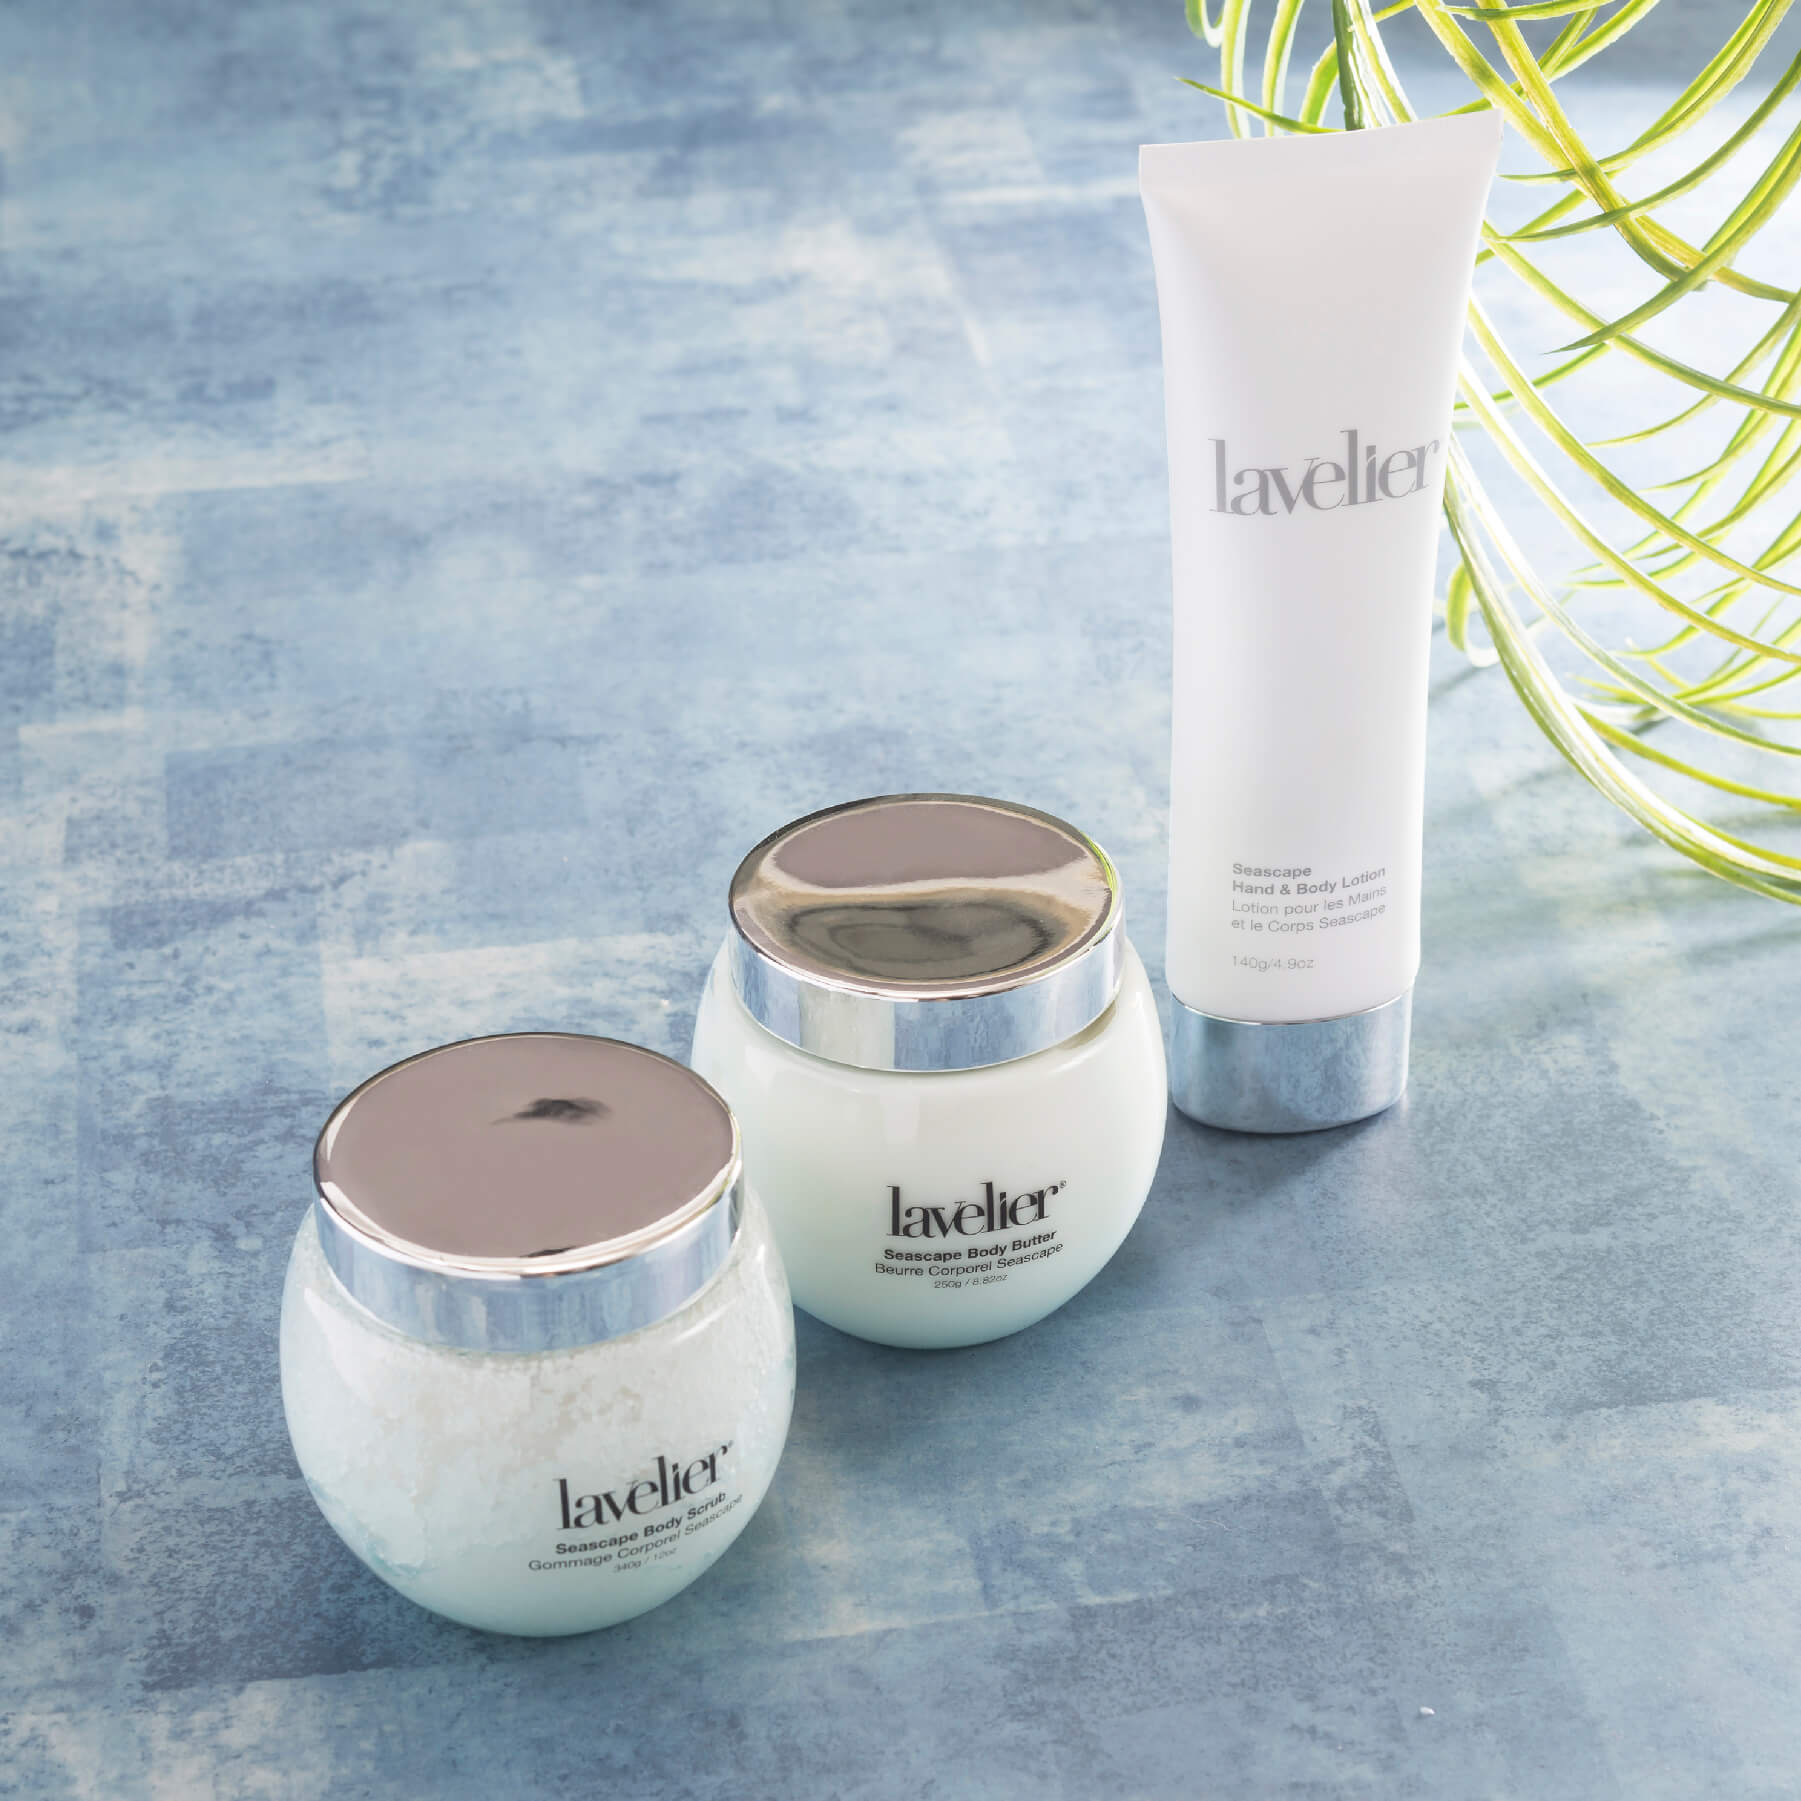 Treat yourself to the Seascape Body Butter to love your skin